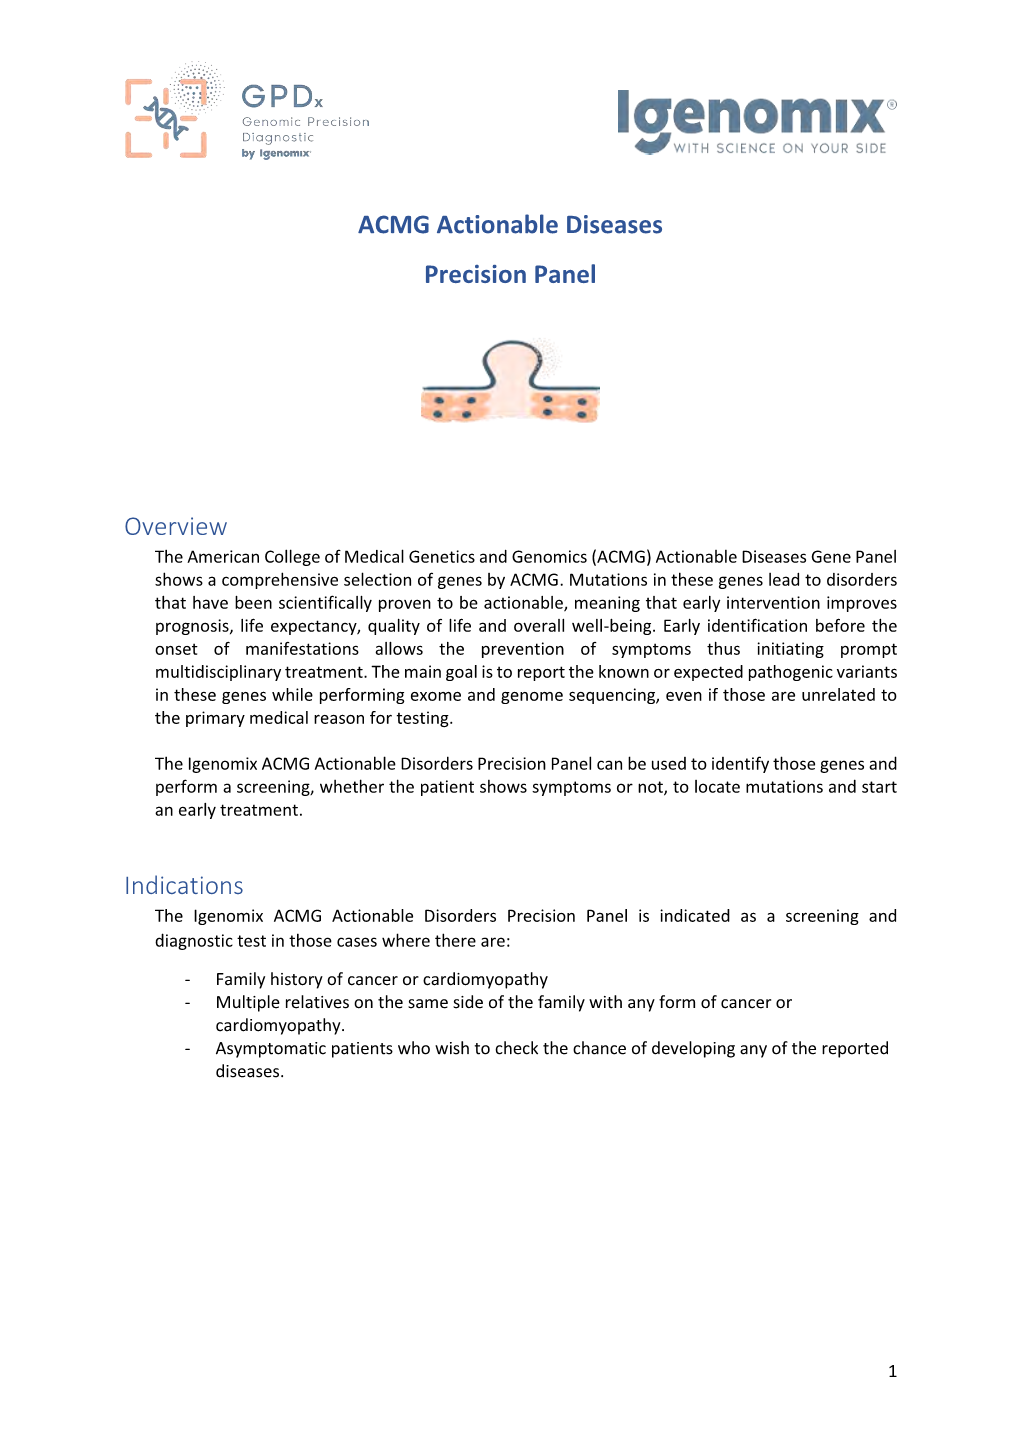 ACMG Actionable Diseases Precision Panel Overview Indications